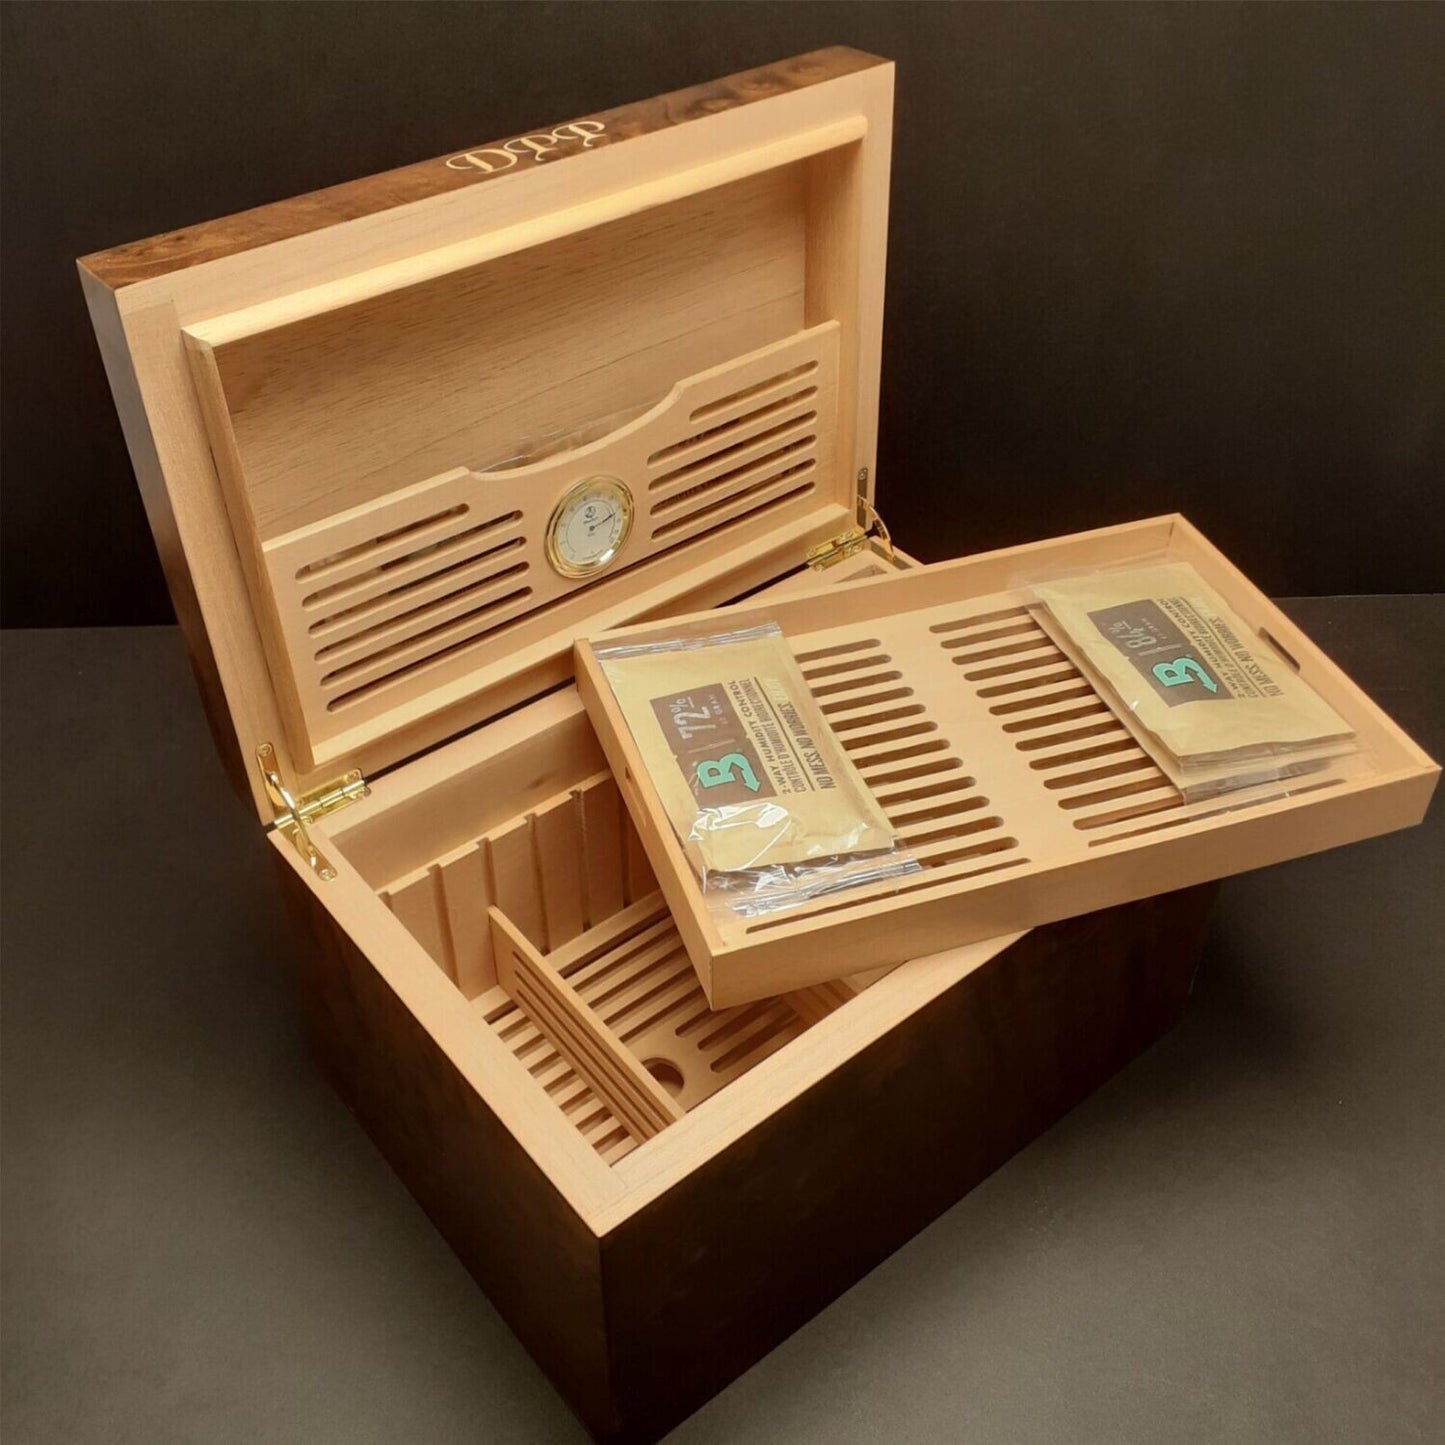 150-Count Handcrafted Humidor (with Guitar Motif)  Made in the U.S.